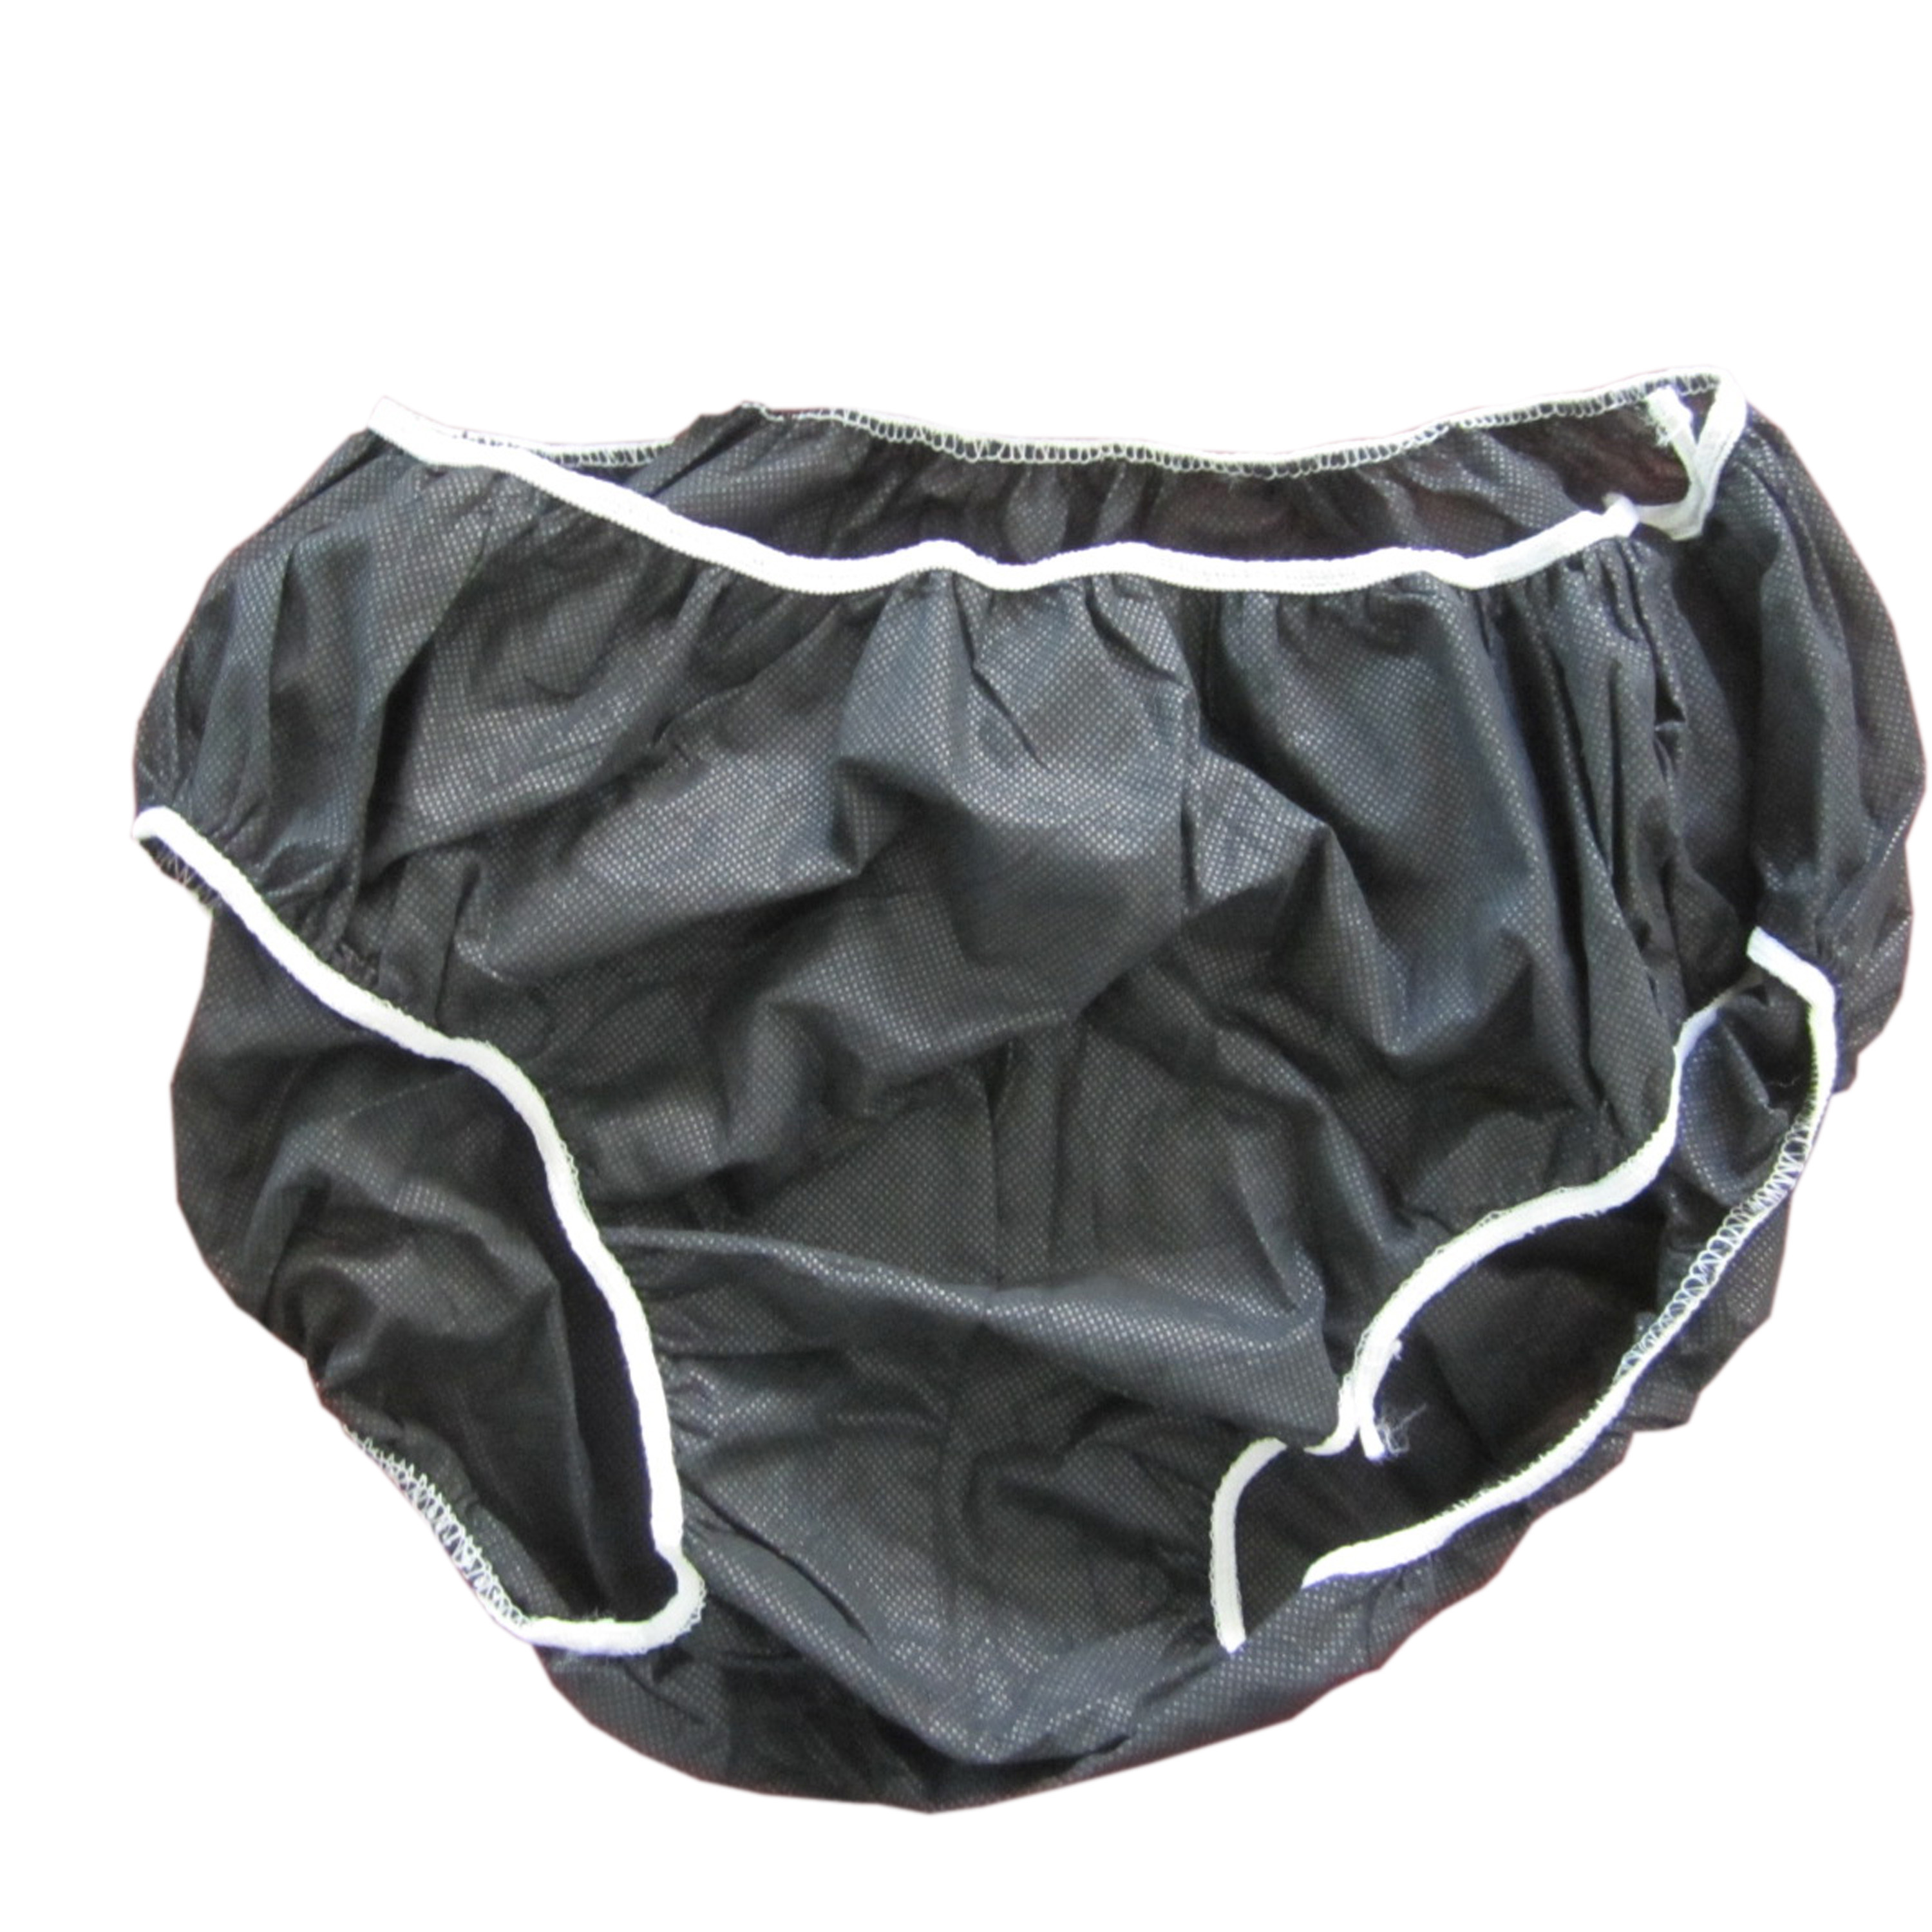 Nonwoven disposable panties for female